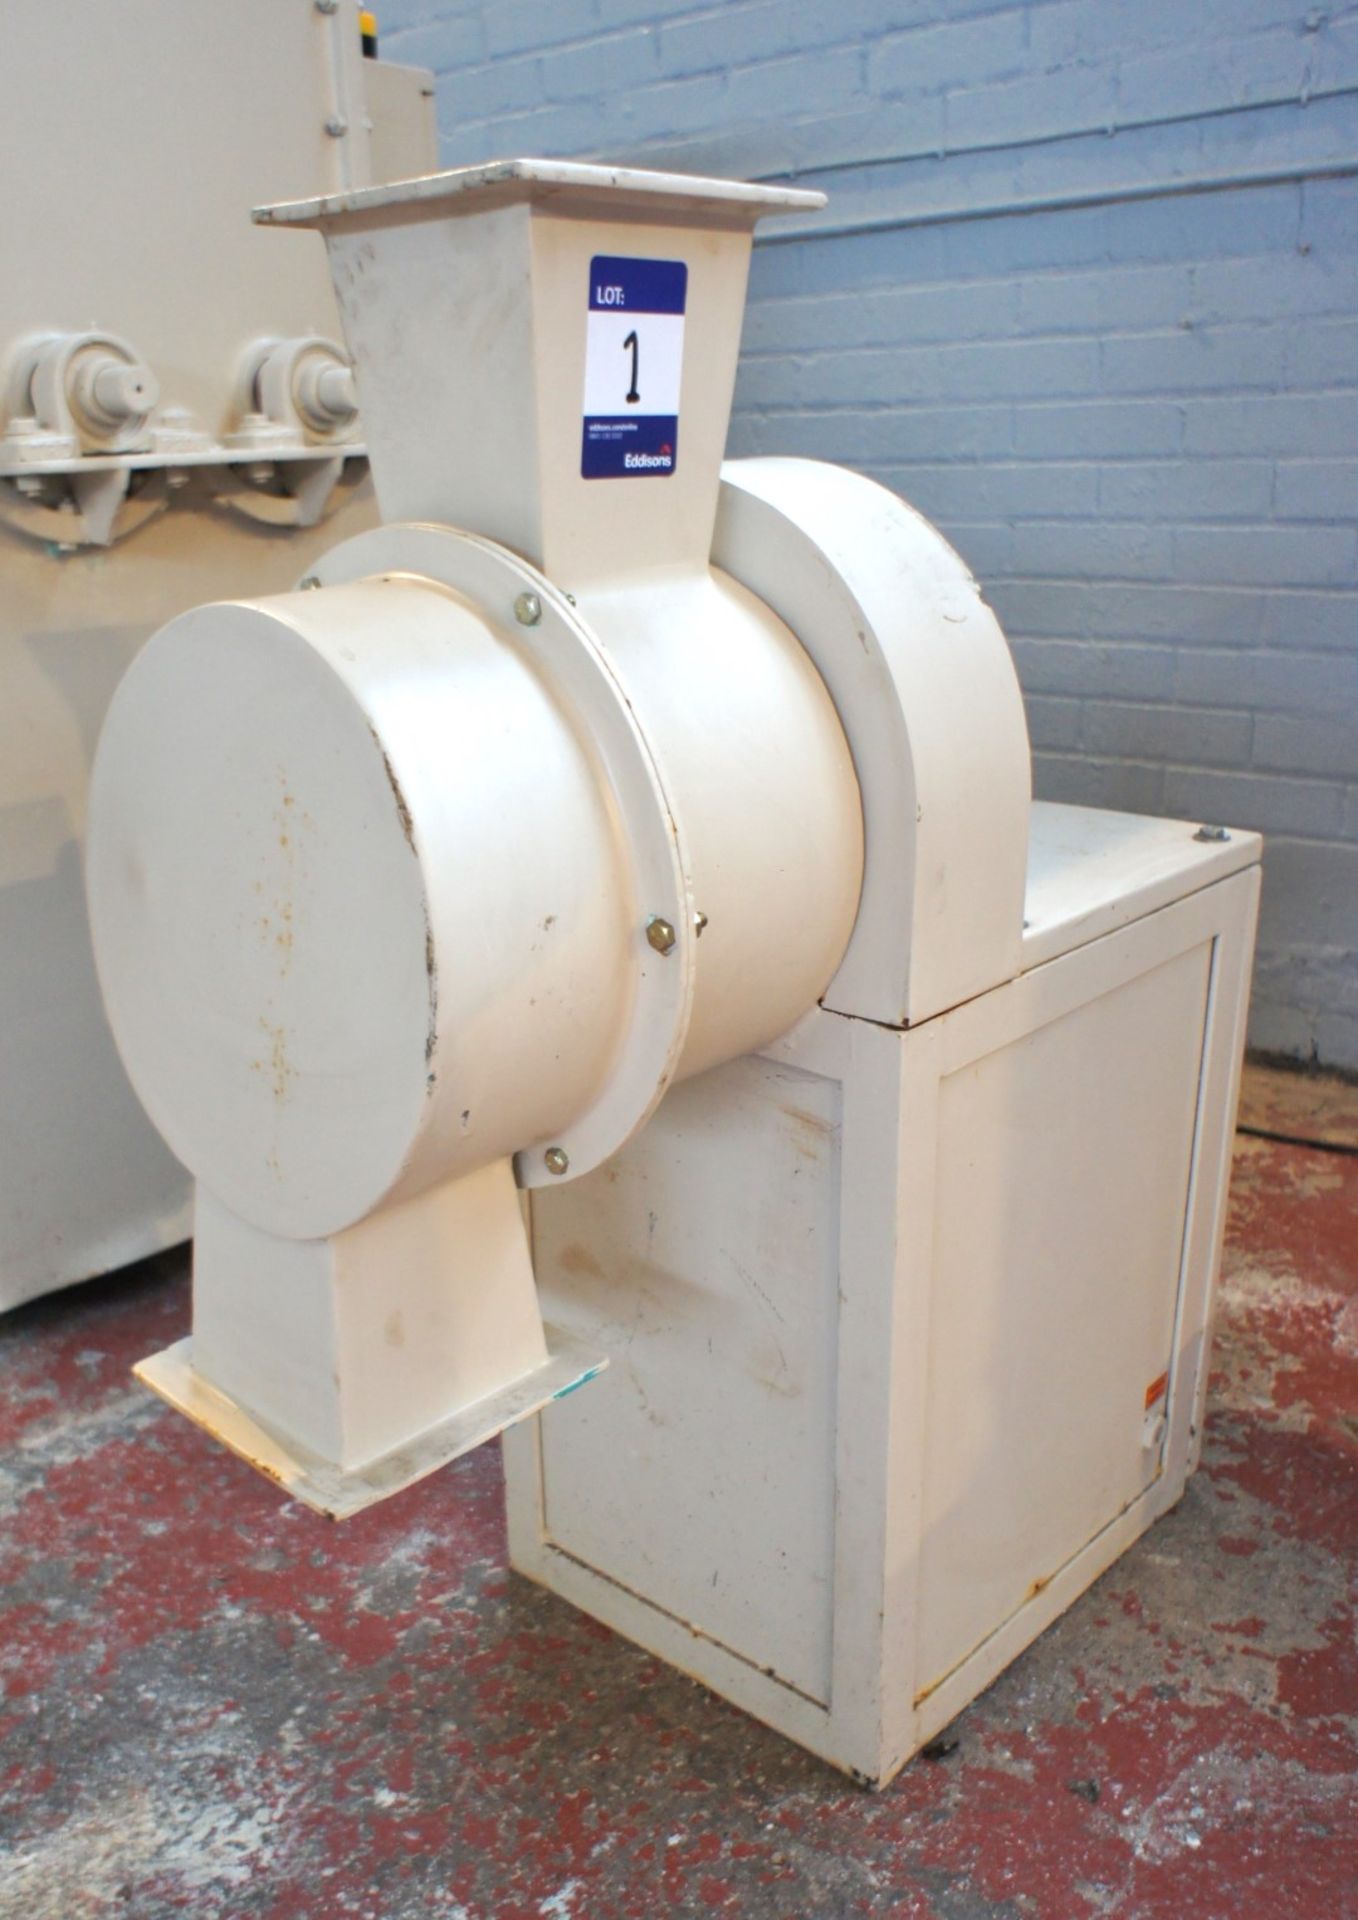 GCL Toilet Soap Plant with capacity of 3 tons/day (125Kg/hour) with: Caustic Lay Tank, - Image 32 of 47